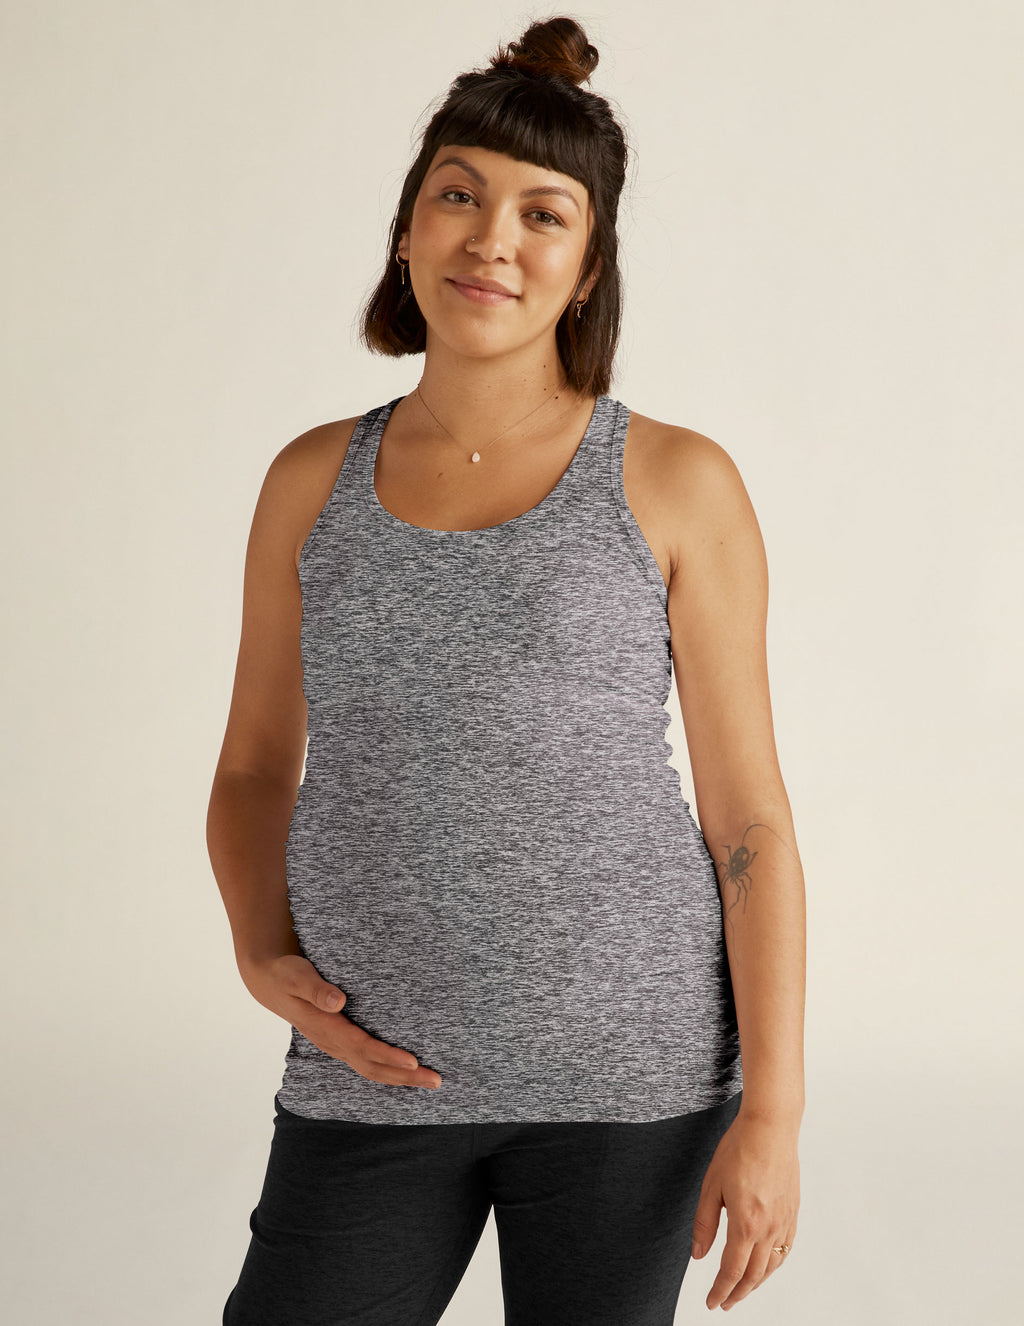 Featherweight Clip And Cuddle Nursing Cami